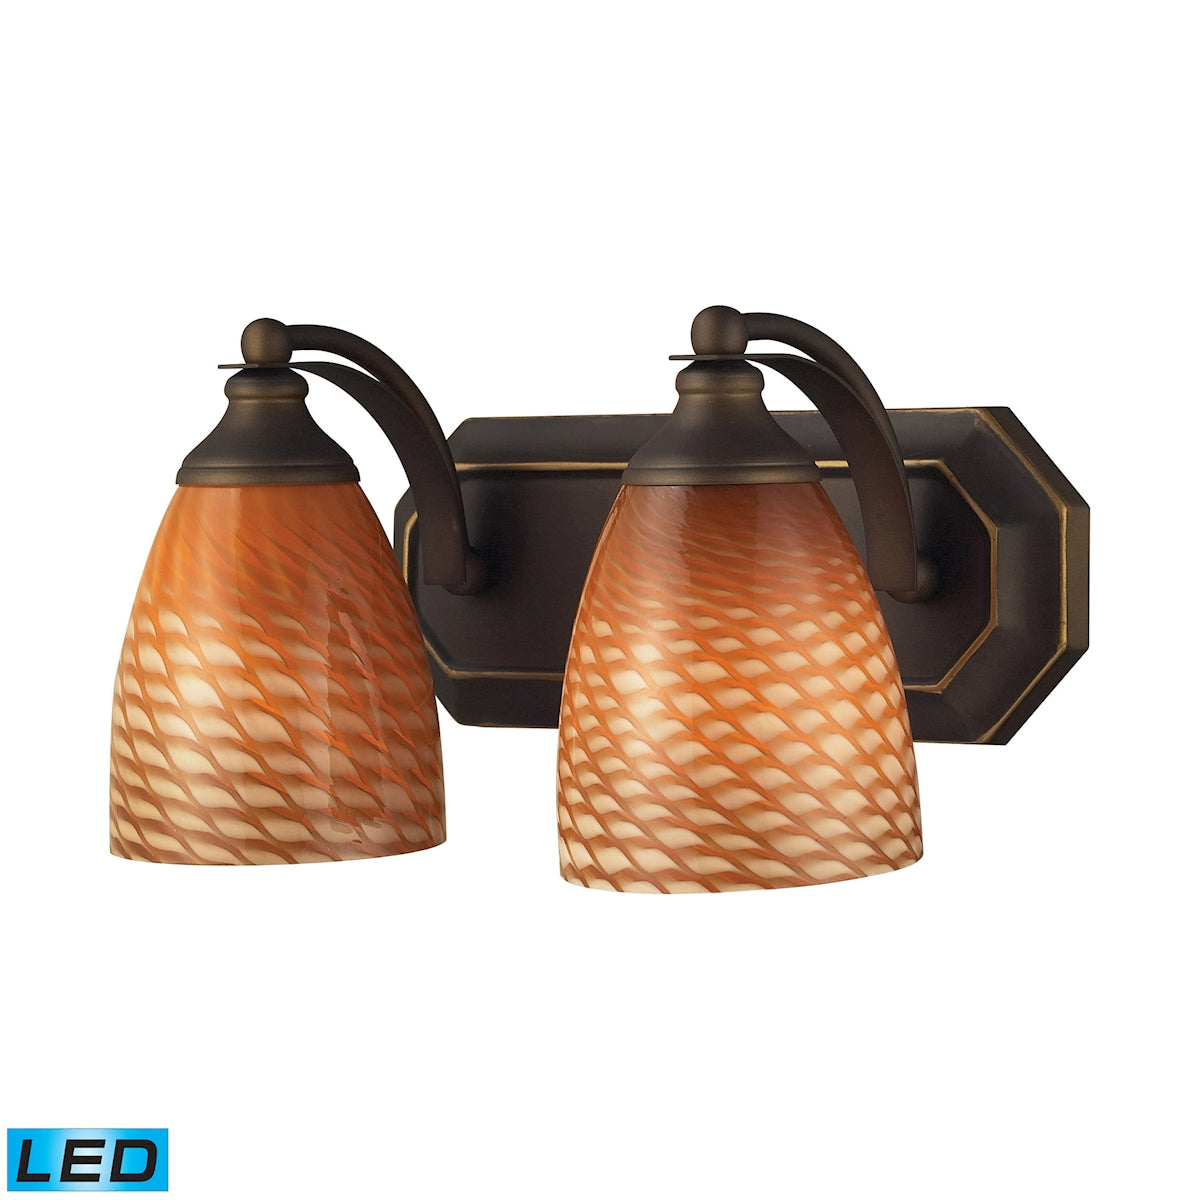 ELK Lighting 570-2B-C-LED Mix-N-Match Vanity 2-Light Wall Lamp in Aged Bronze with Cocoa Glass - Includes LED Bulbs